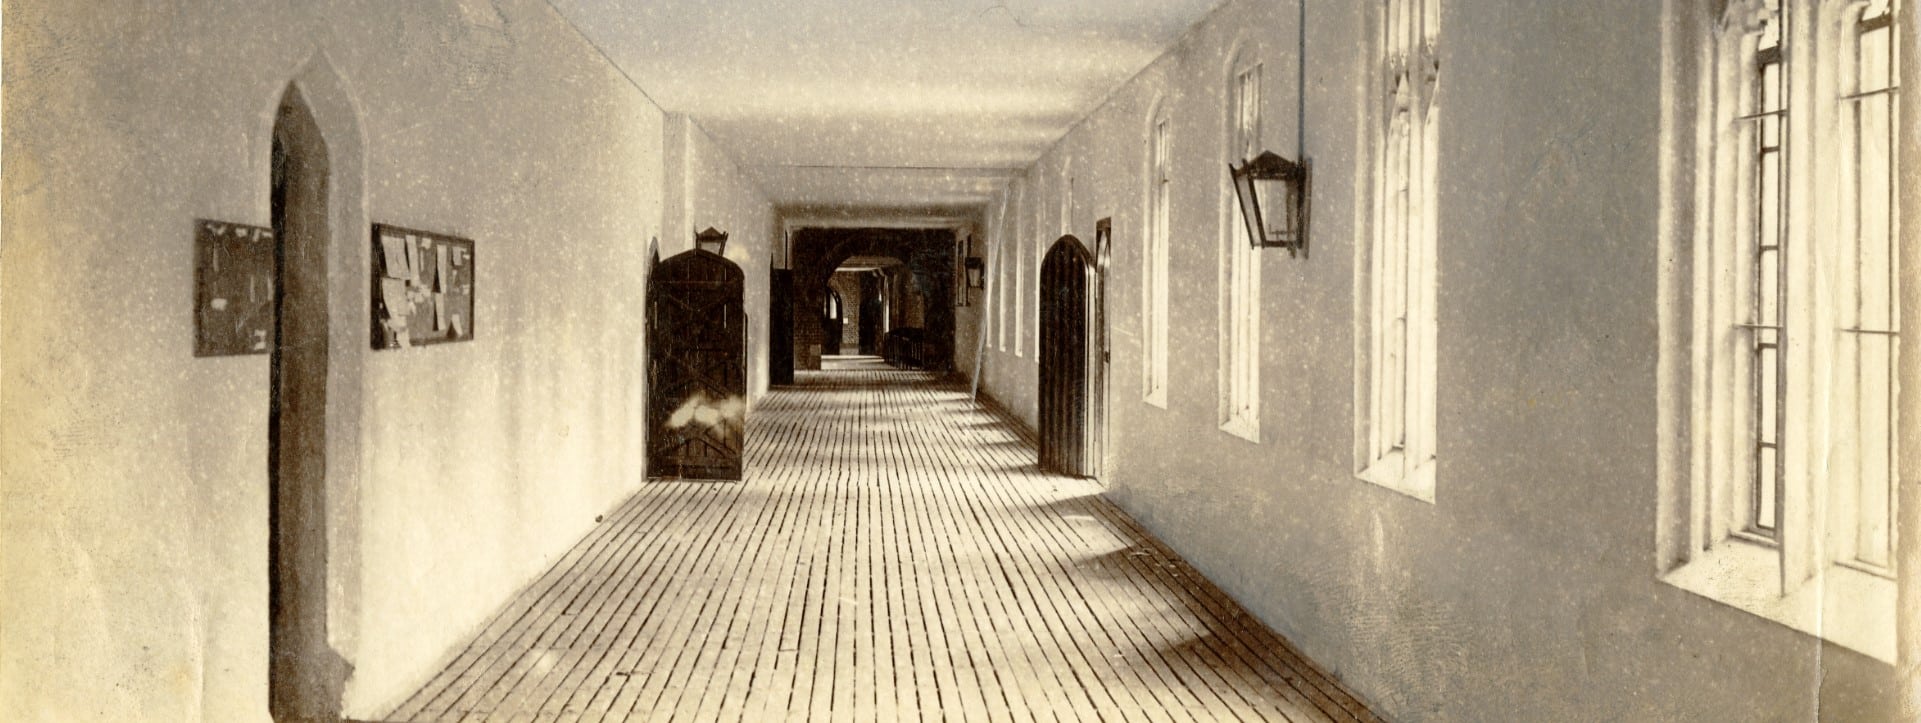 Historic photo of covered passage with flooboards.